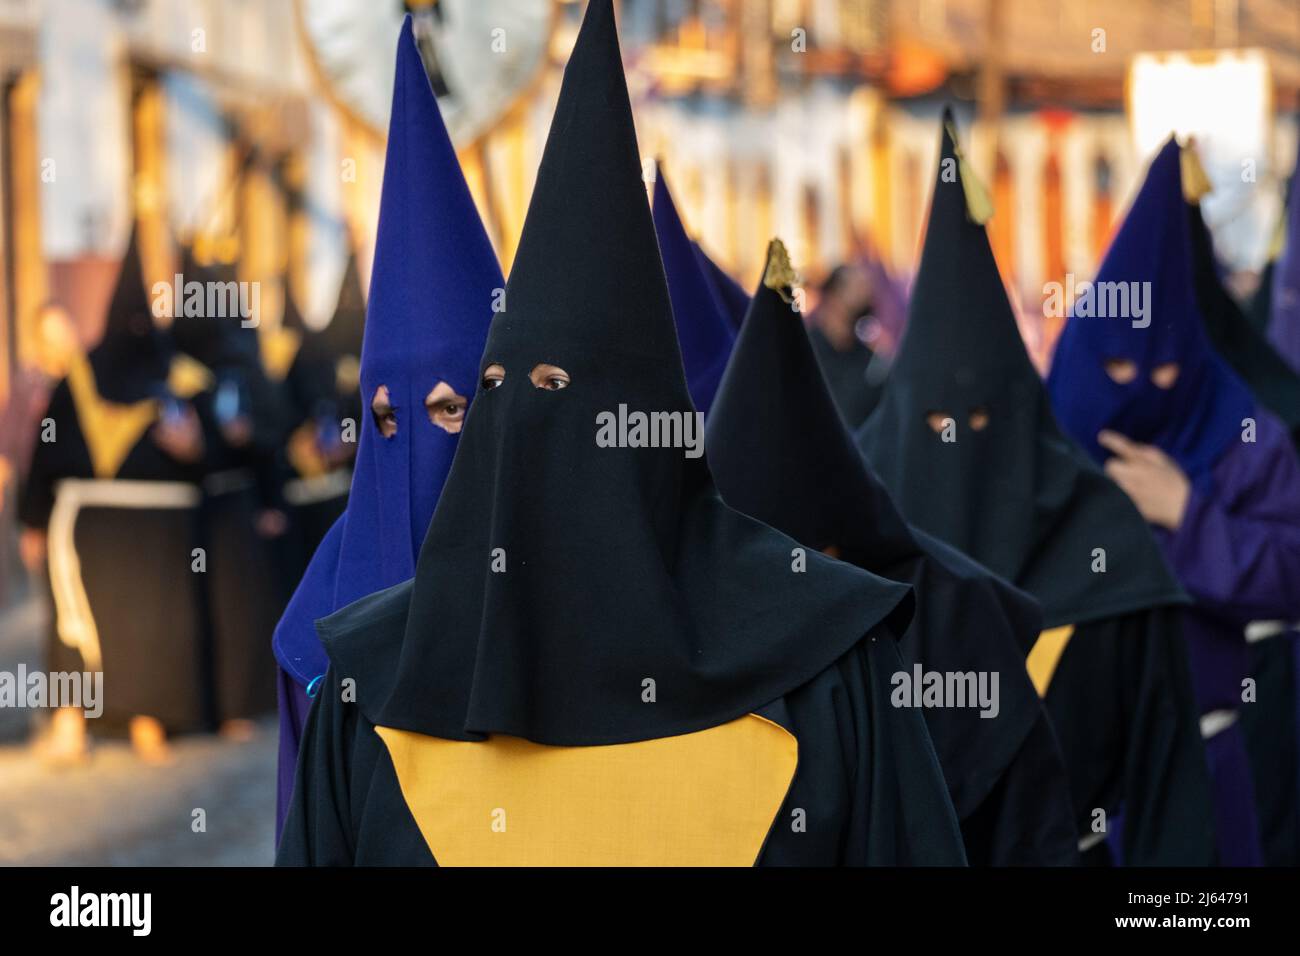 Roman Catholic hooded penitents wearing traditional capirotes, hold a procession of silence on Holy Saturday, April 16, 2022 in Patzcuaro, Michoacan, Mexico. The small indigenous town retains traditions from Colonial Spanish rule including the confraternity of penitents during Holy Week. Stock Photo